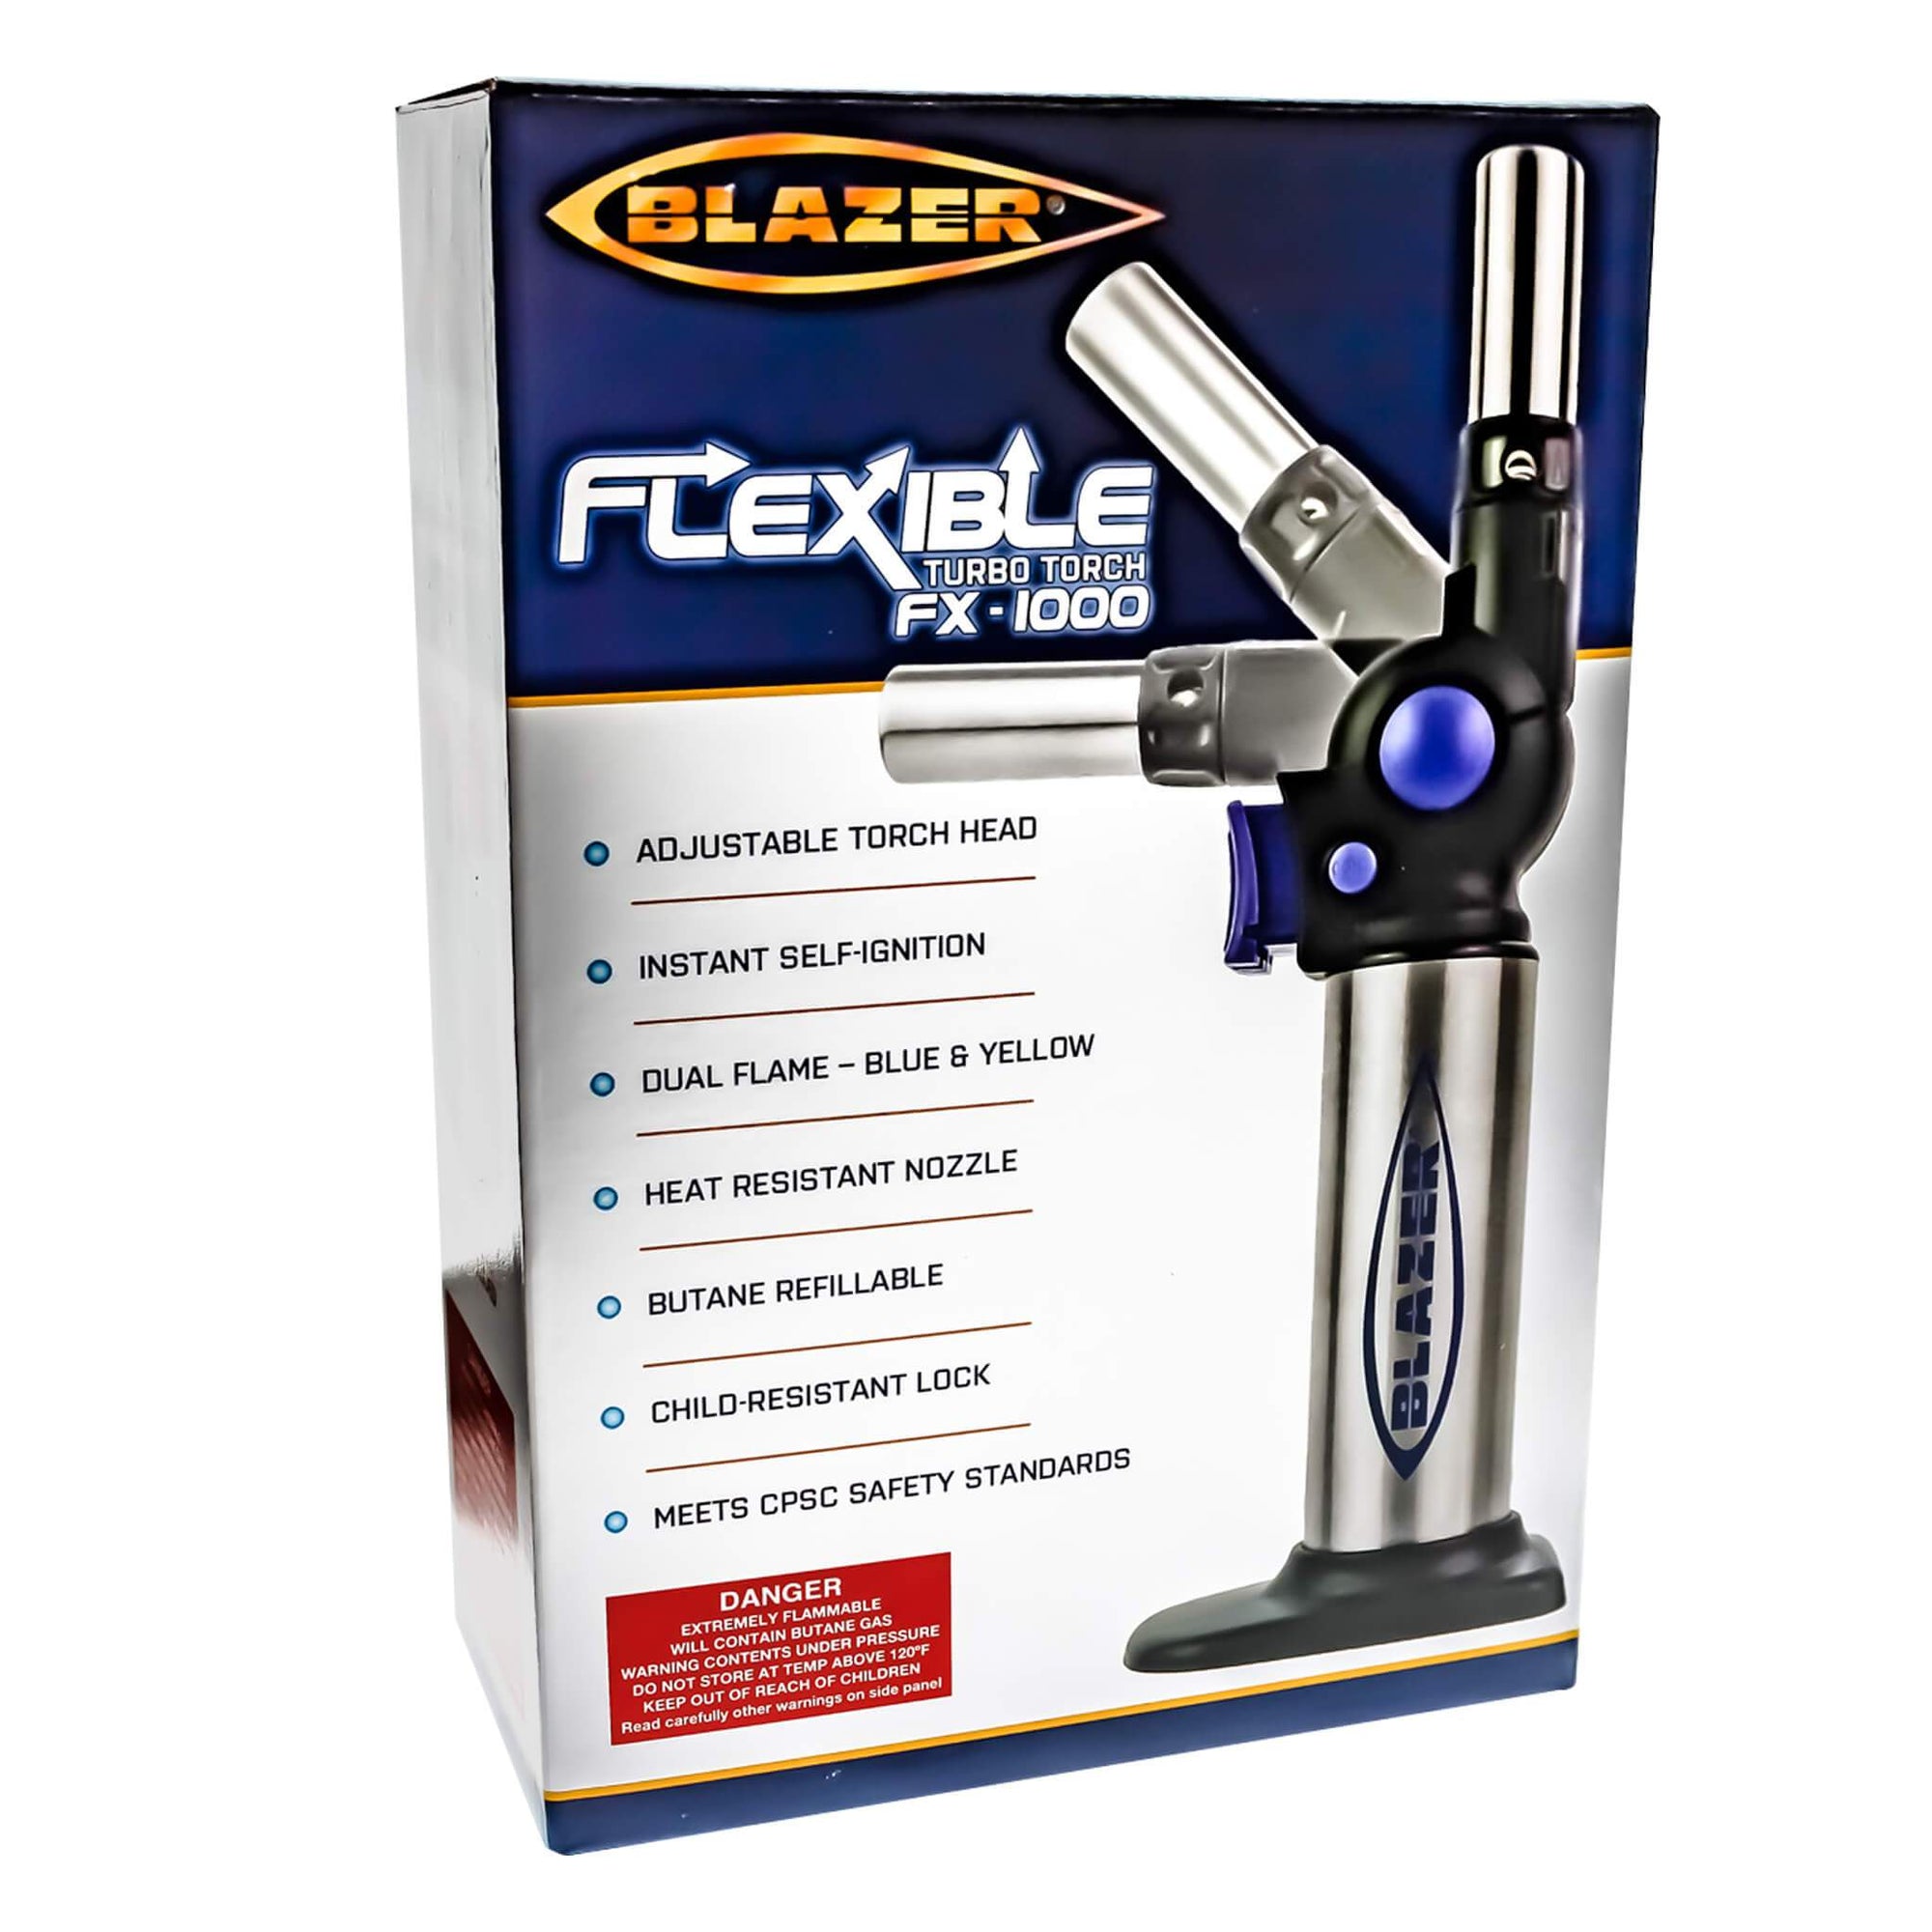 Blazer Flexible Turbo Torch | Red & Blue Boxed View | the dabbing specialists